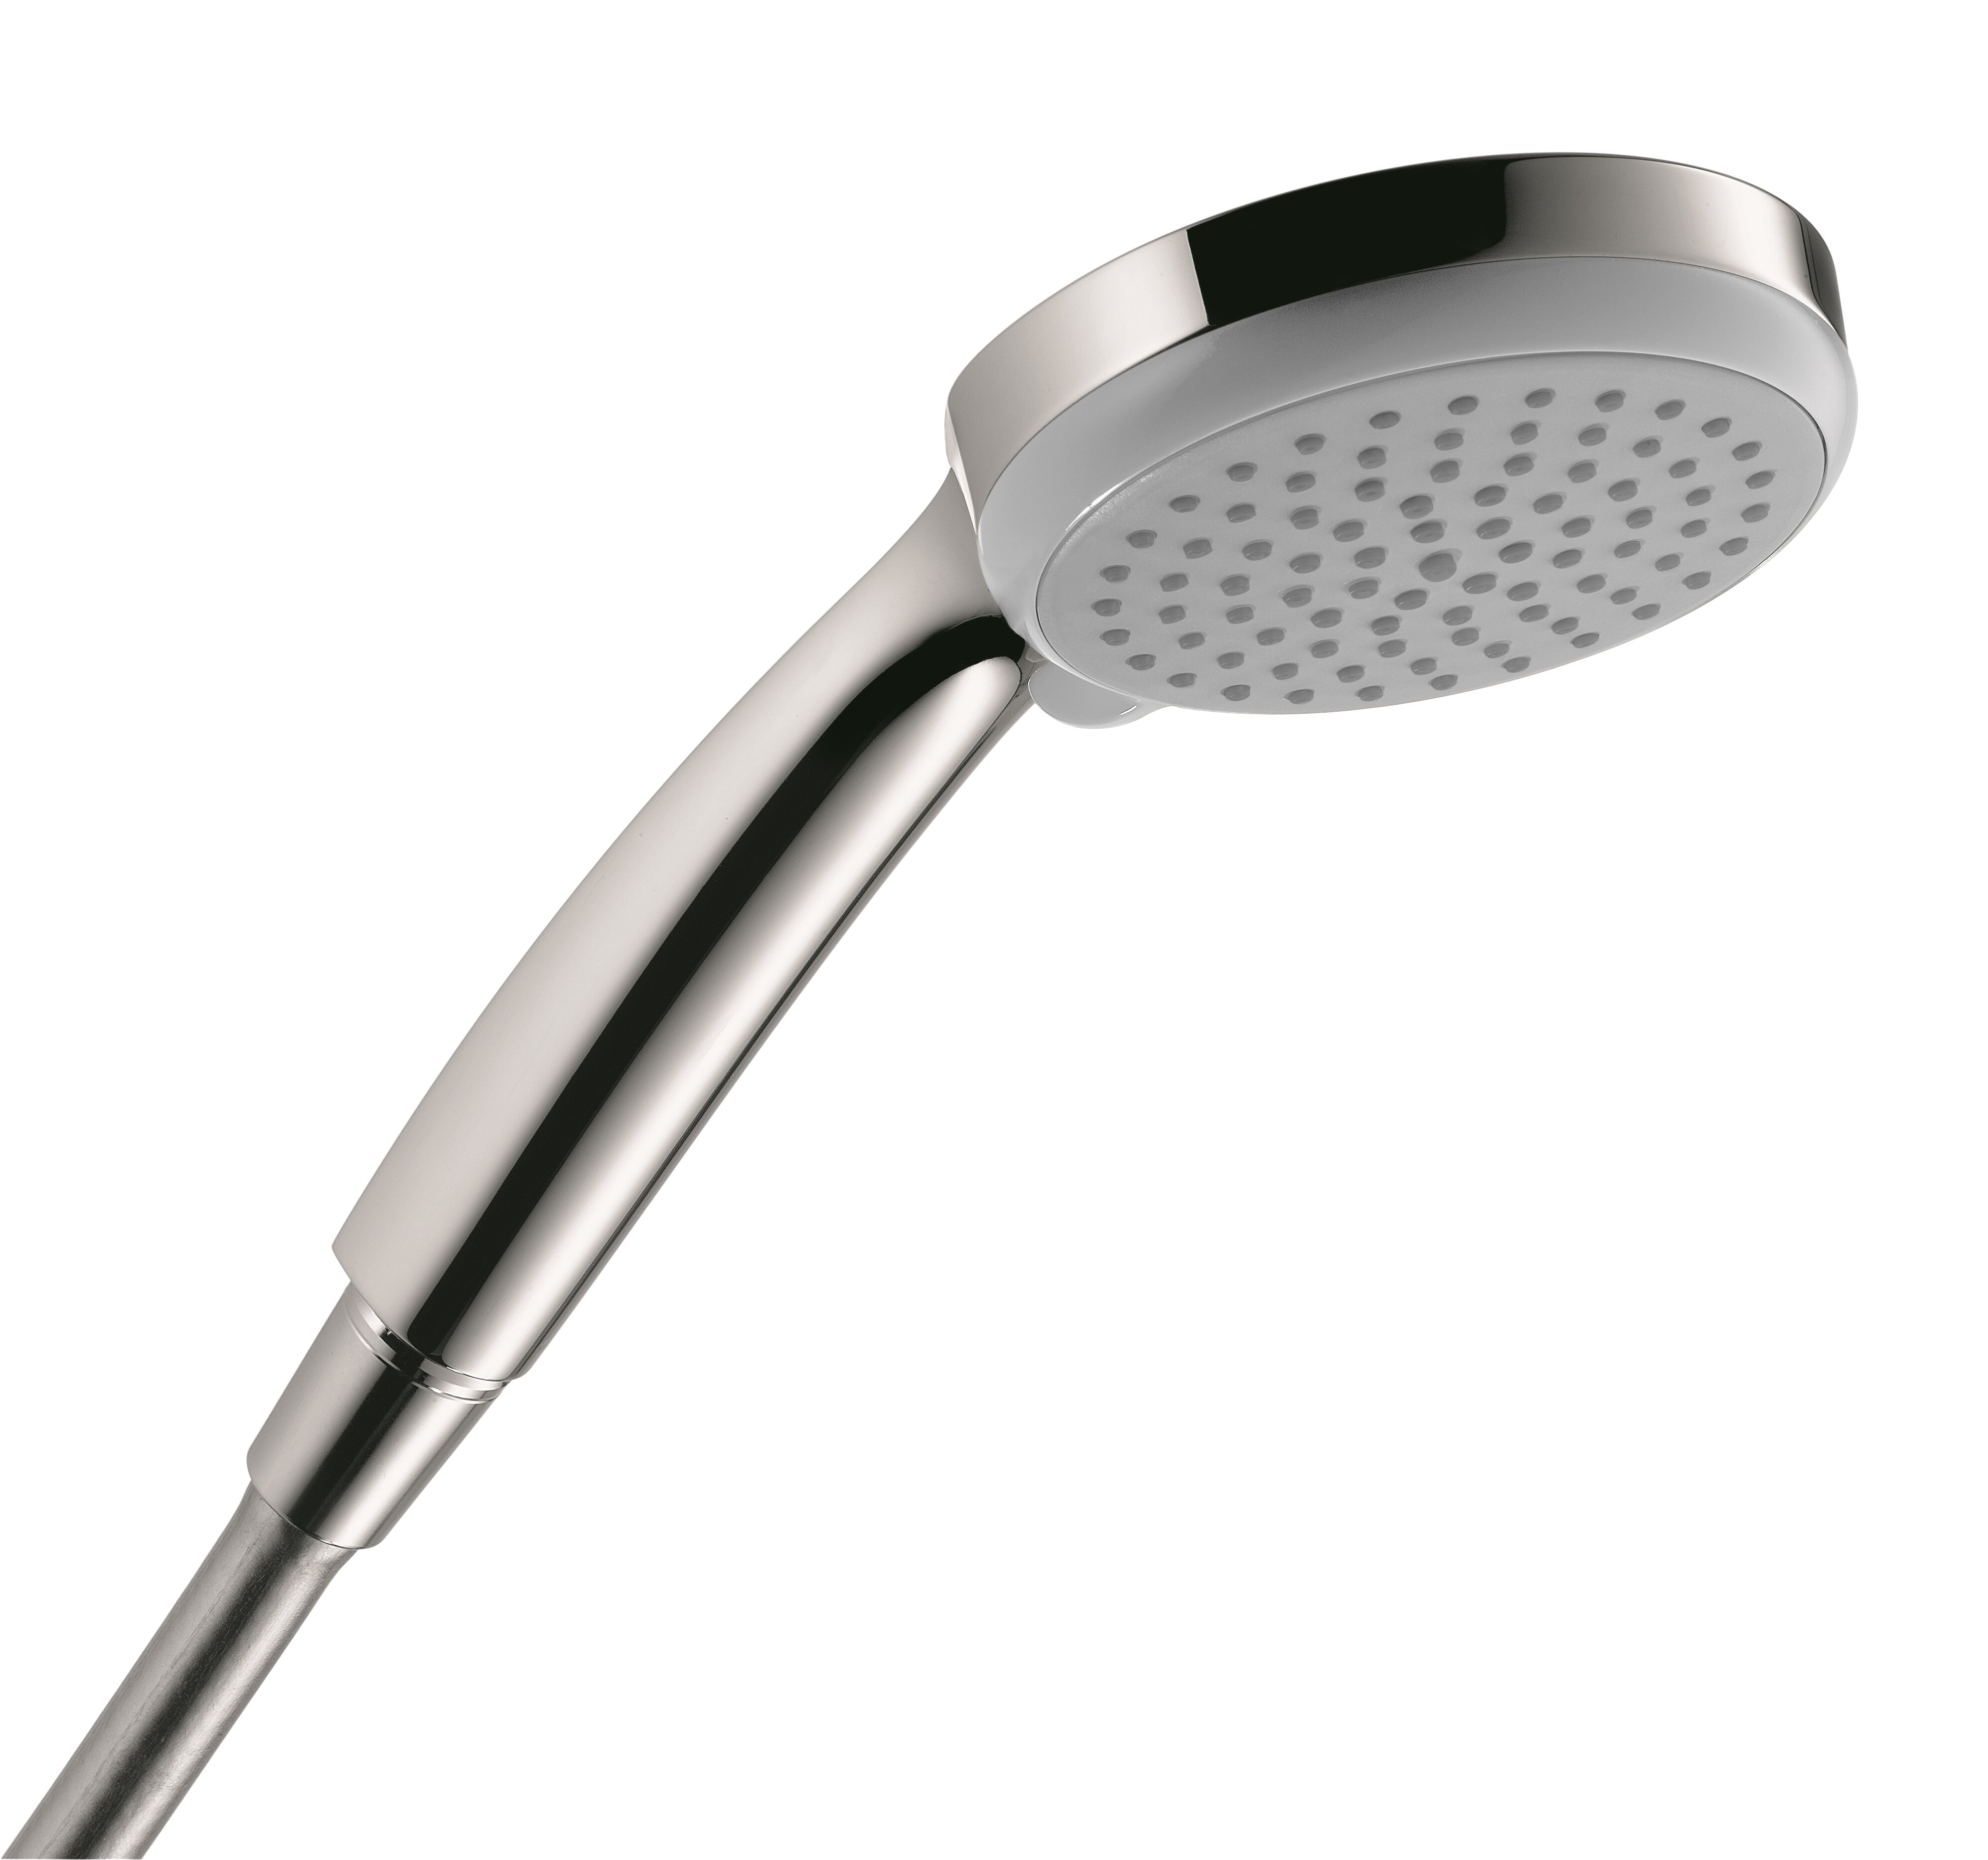 Hansgrohe 04332820 2.0gpm Croma E 100 Vario Jet Handshower, Brushed Nickel  by Hansgrohe